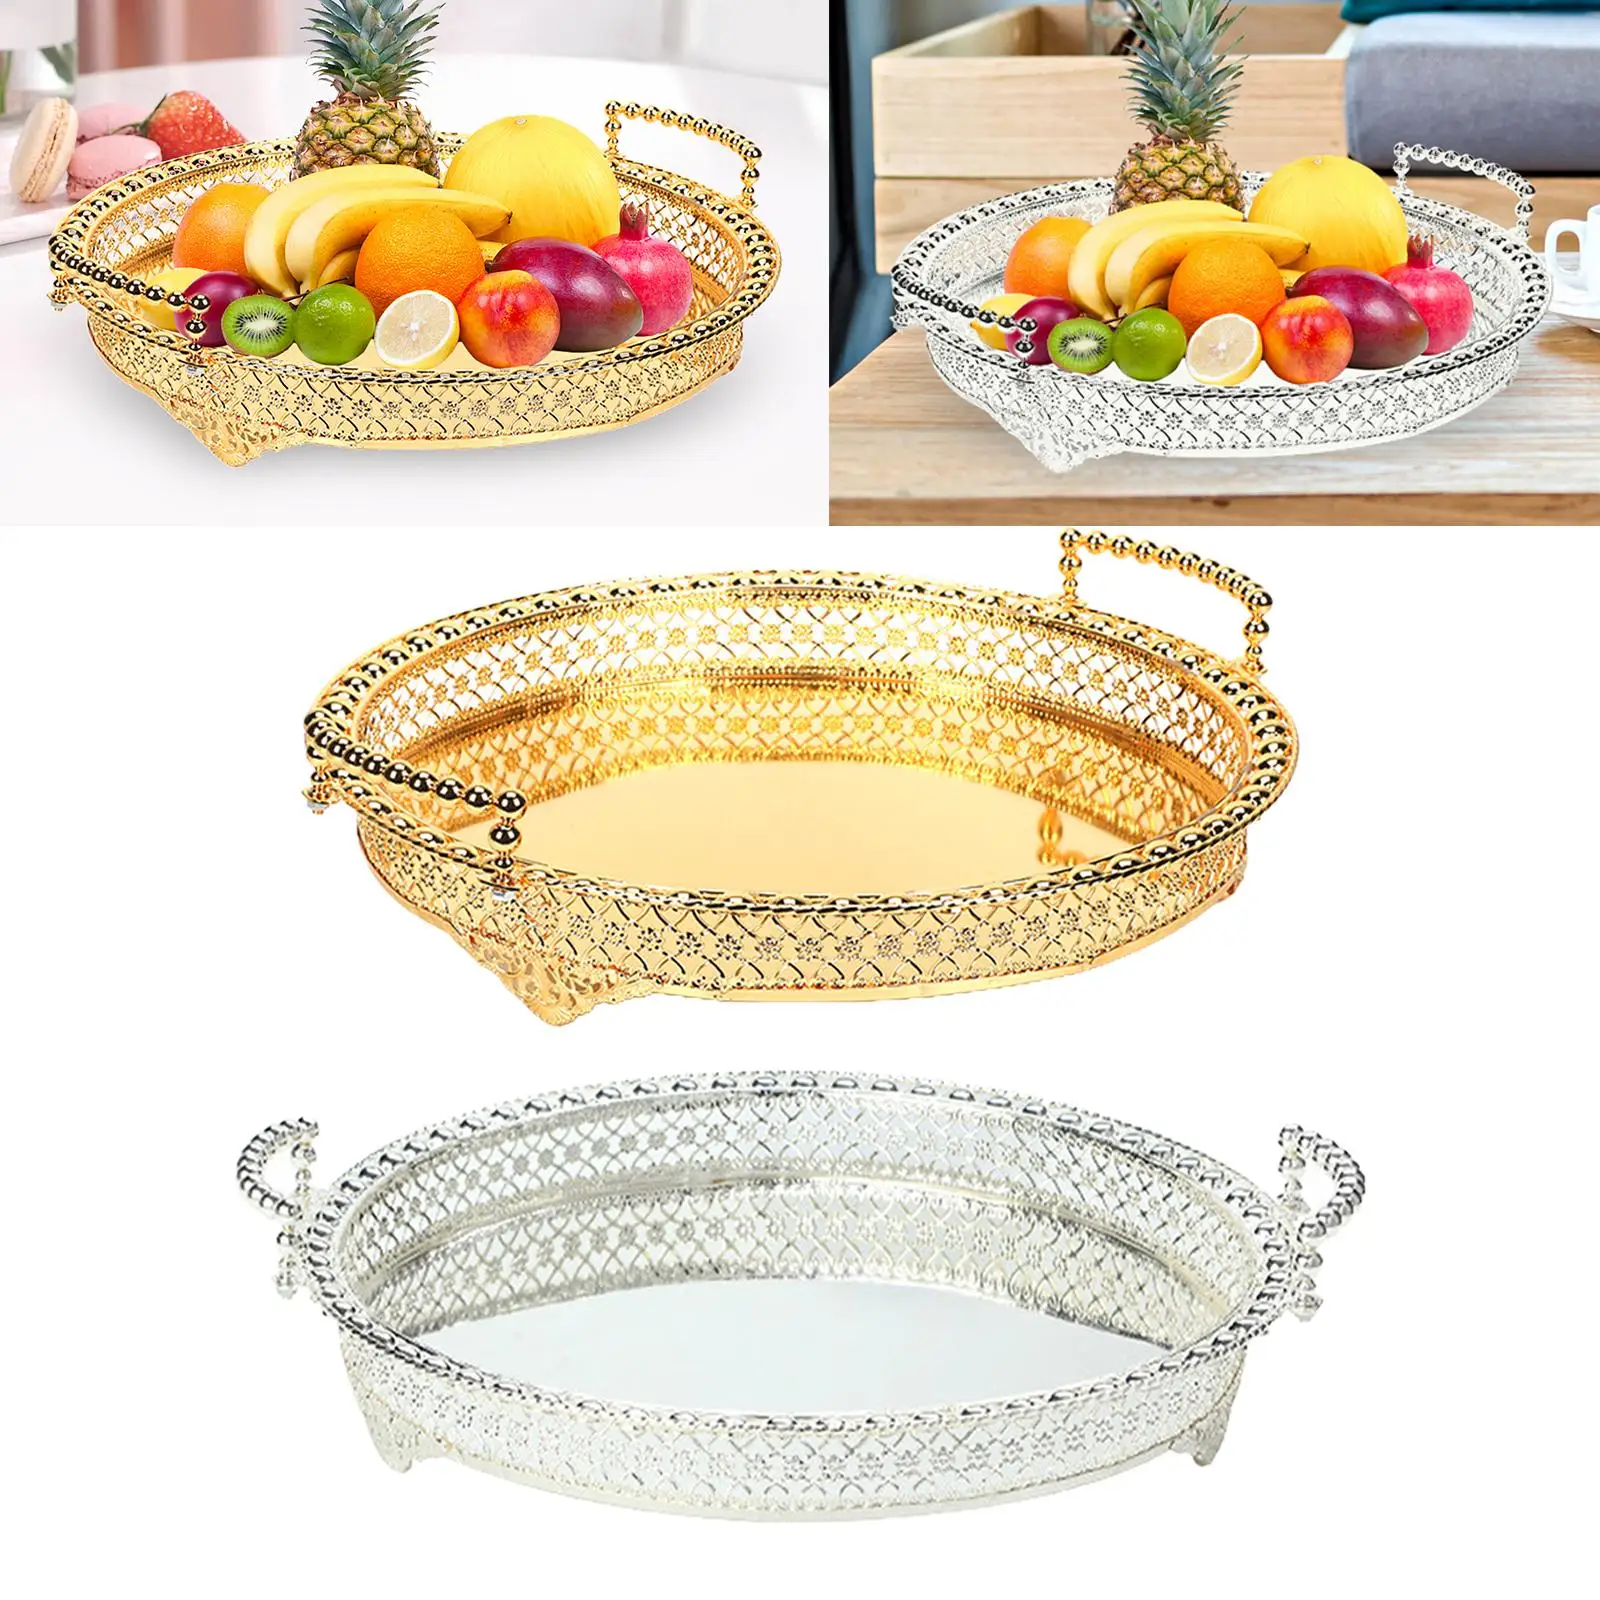 Fruit Plate Jewelry Storage Tray Fruit Basket for Dresser Dining Room Home